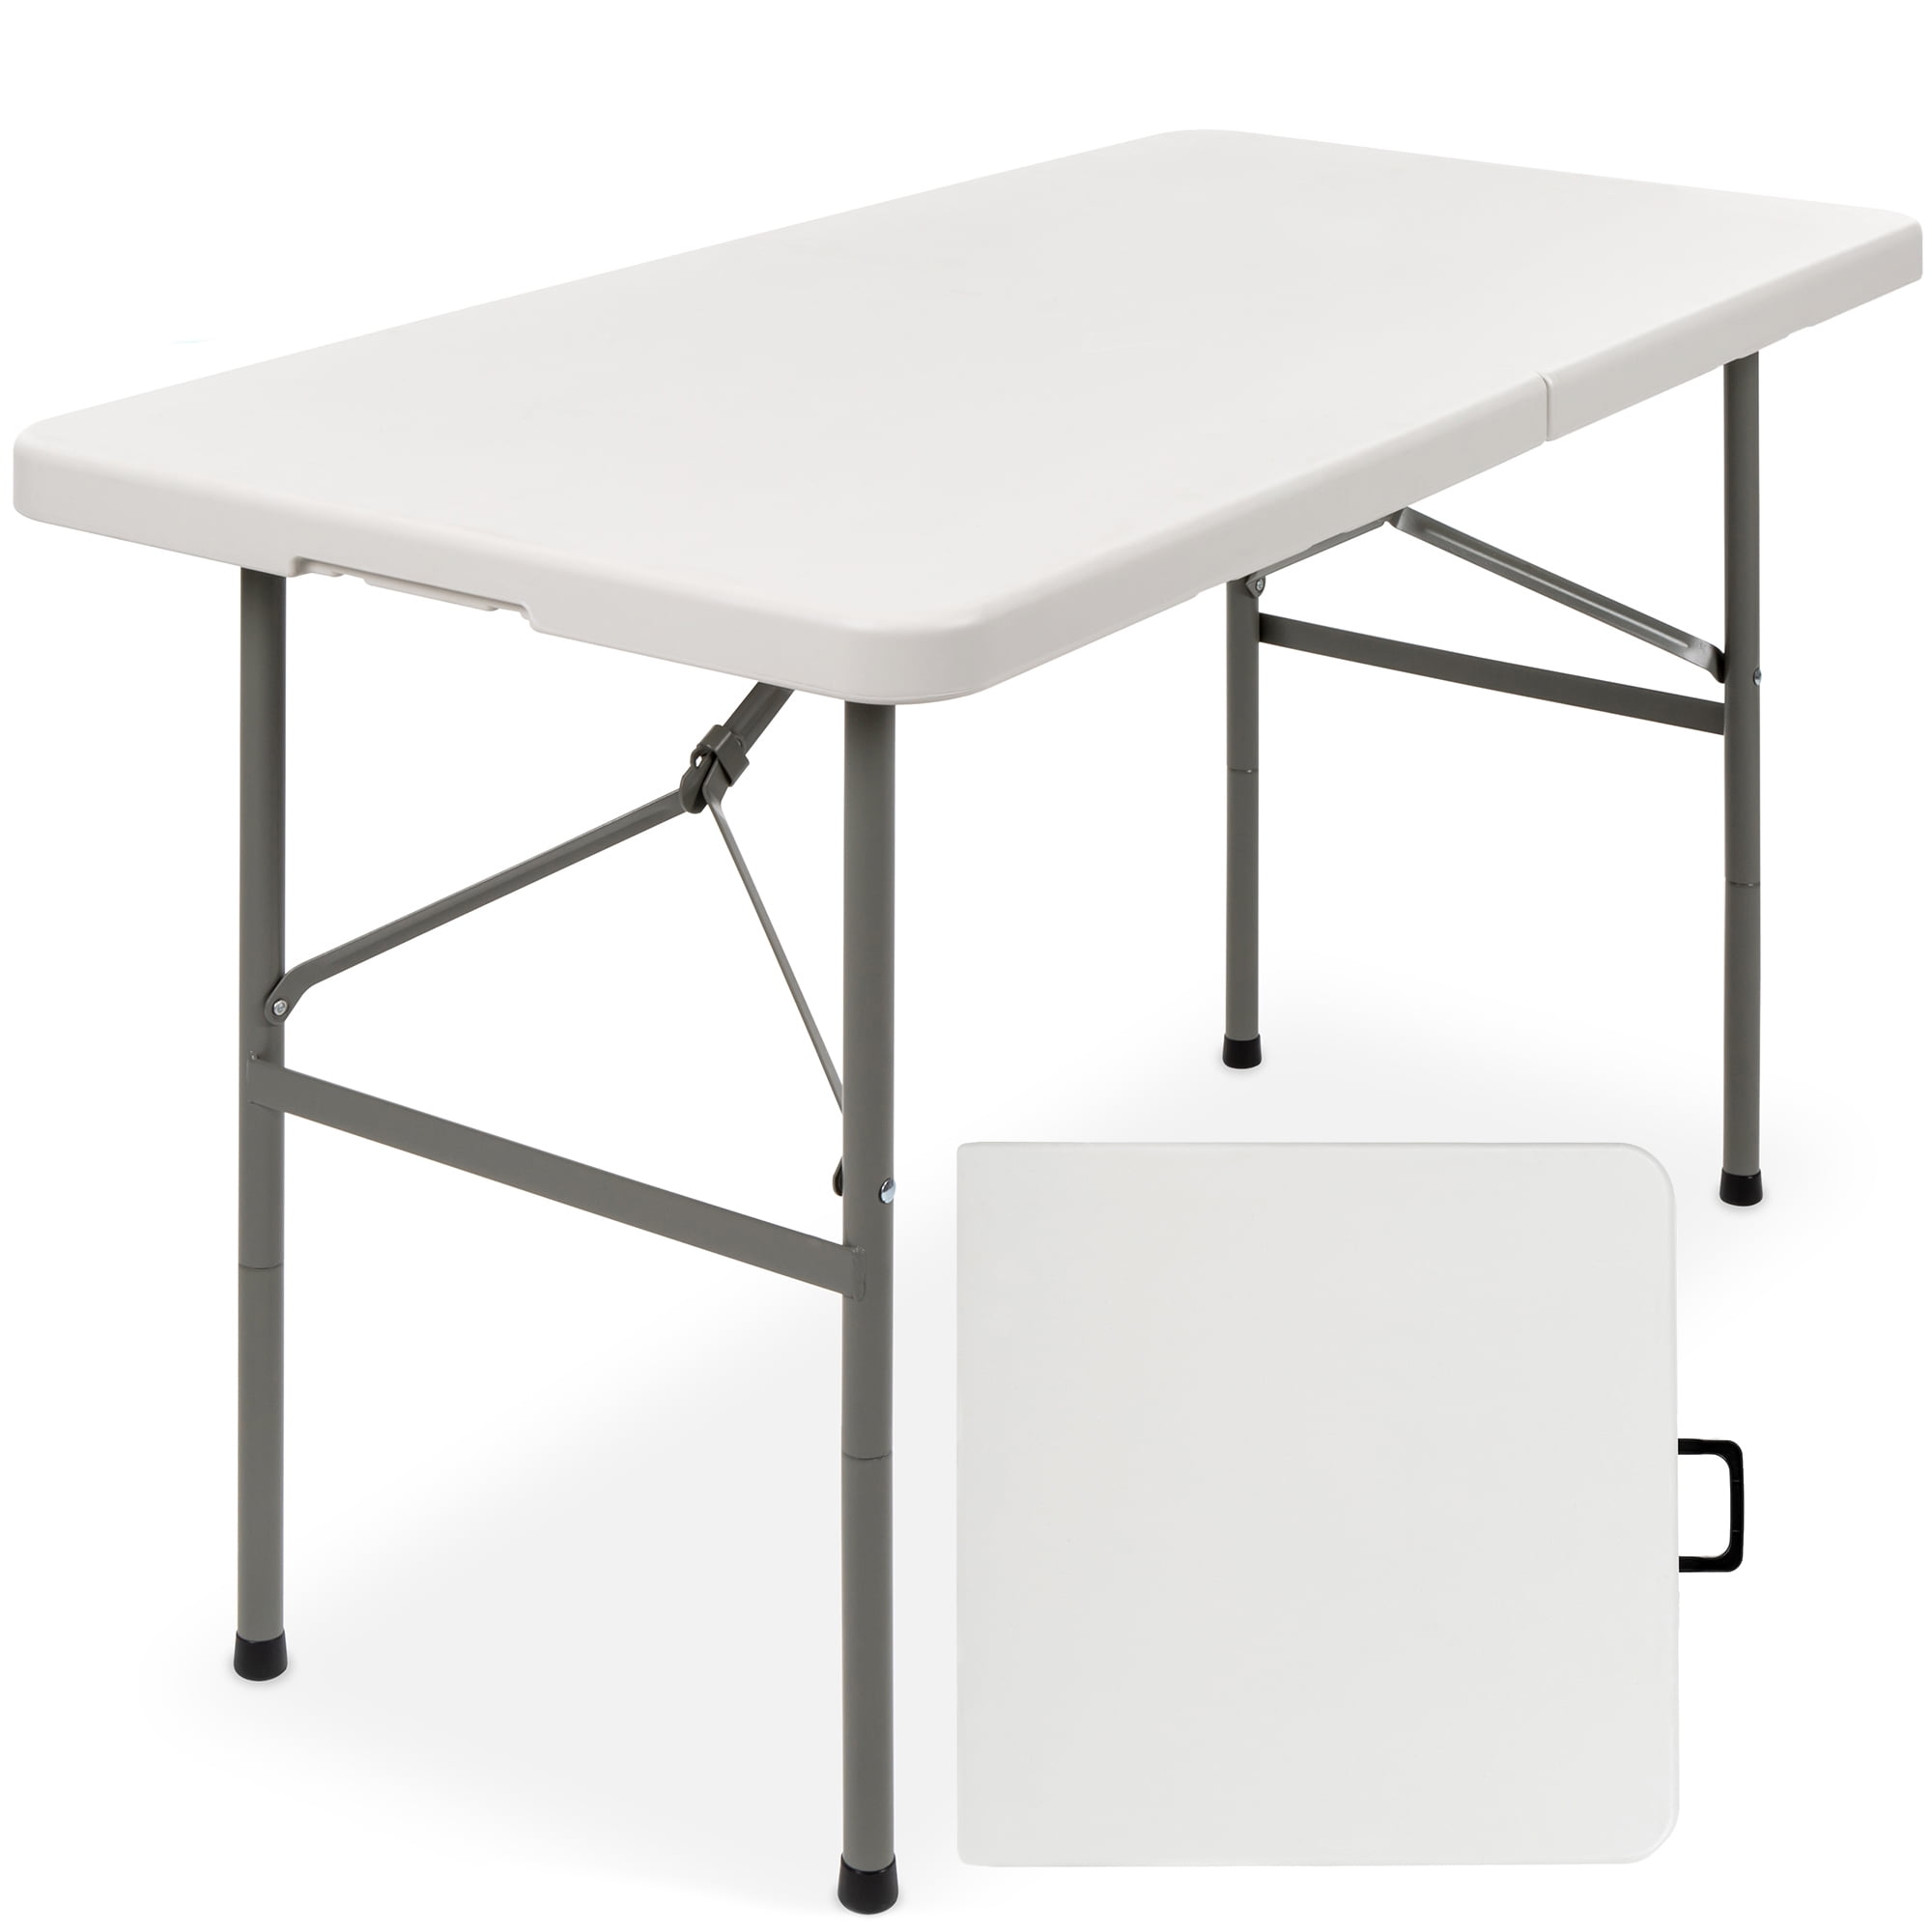 HEAVY DUTY FOLDING TABLE 4FT CAMPING PICNIC BANQUET PARTY GARDEN TABLES WHITE 